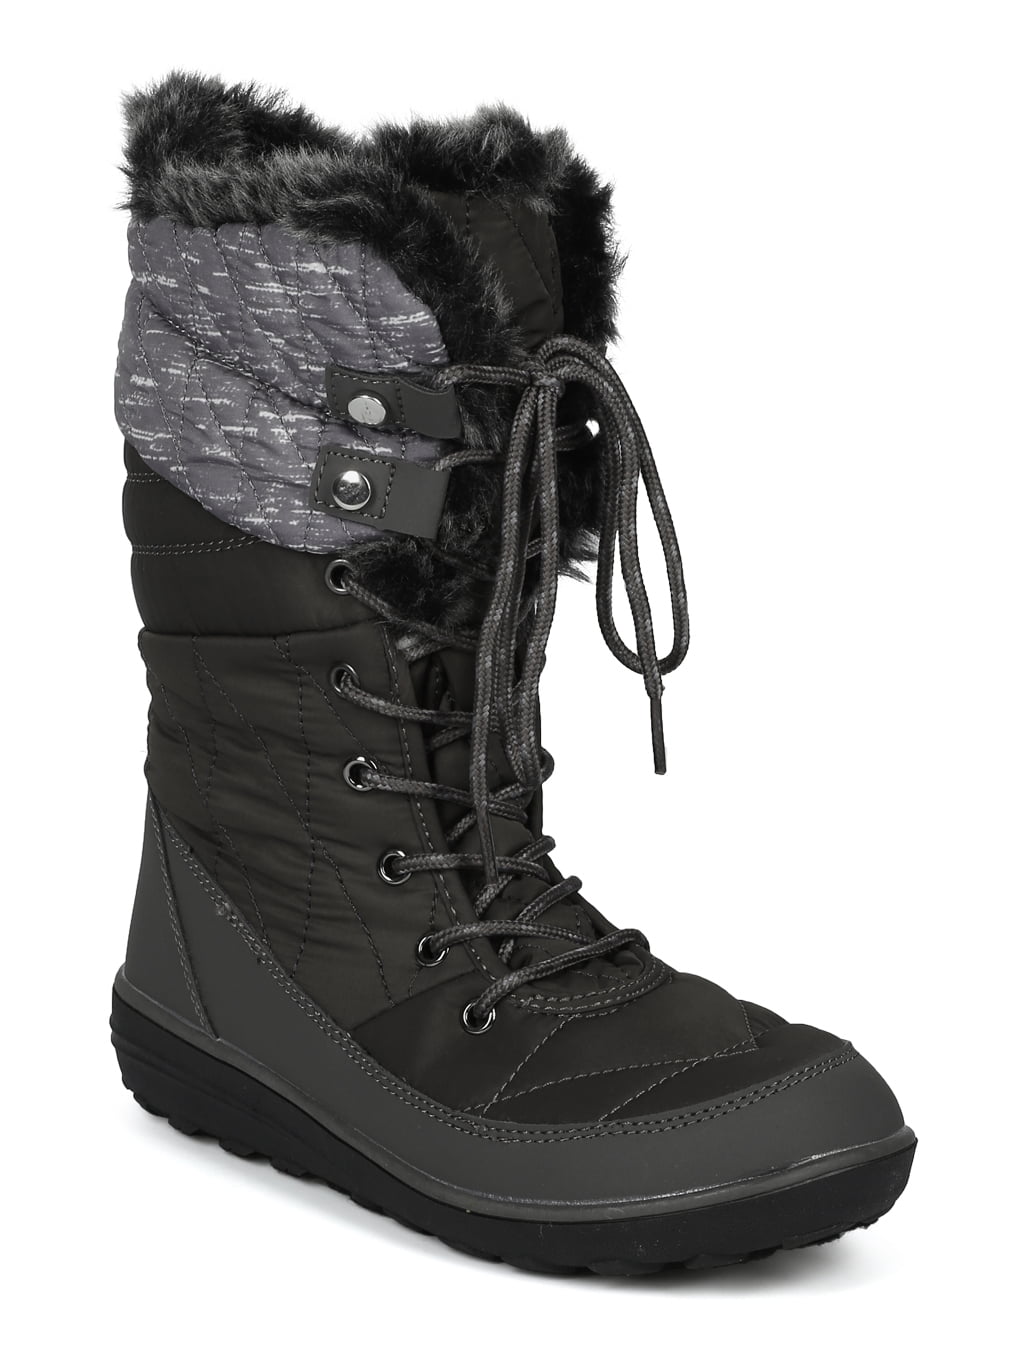 Alrisco Women Mixed Media Mid-Calf Quilted Lace Up Fur Shearling Winter Boot IB53 